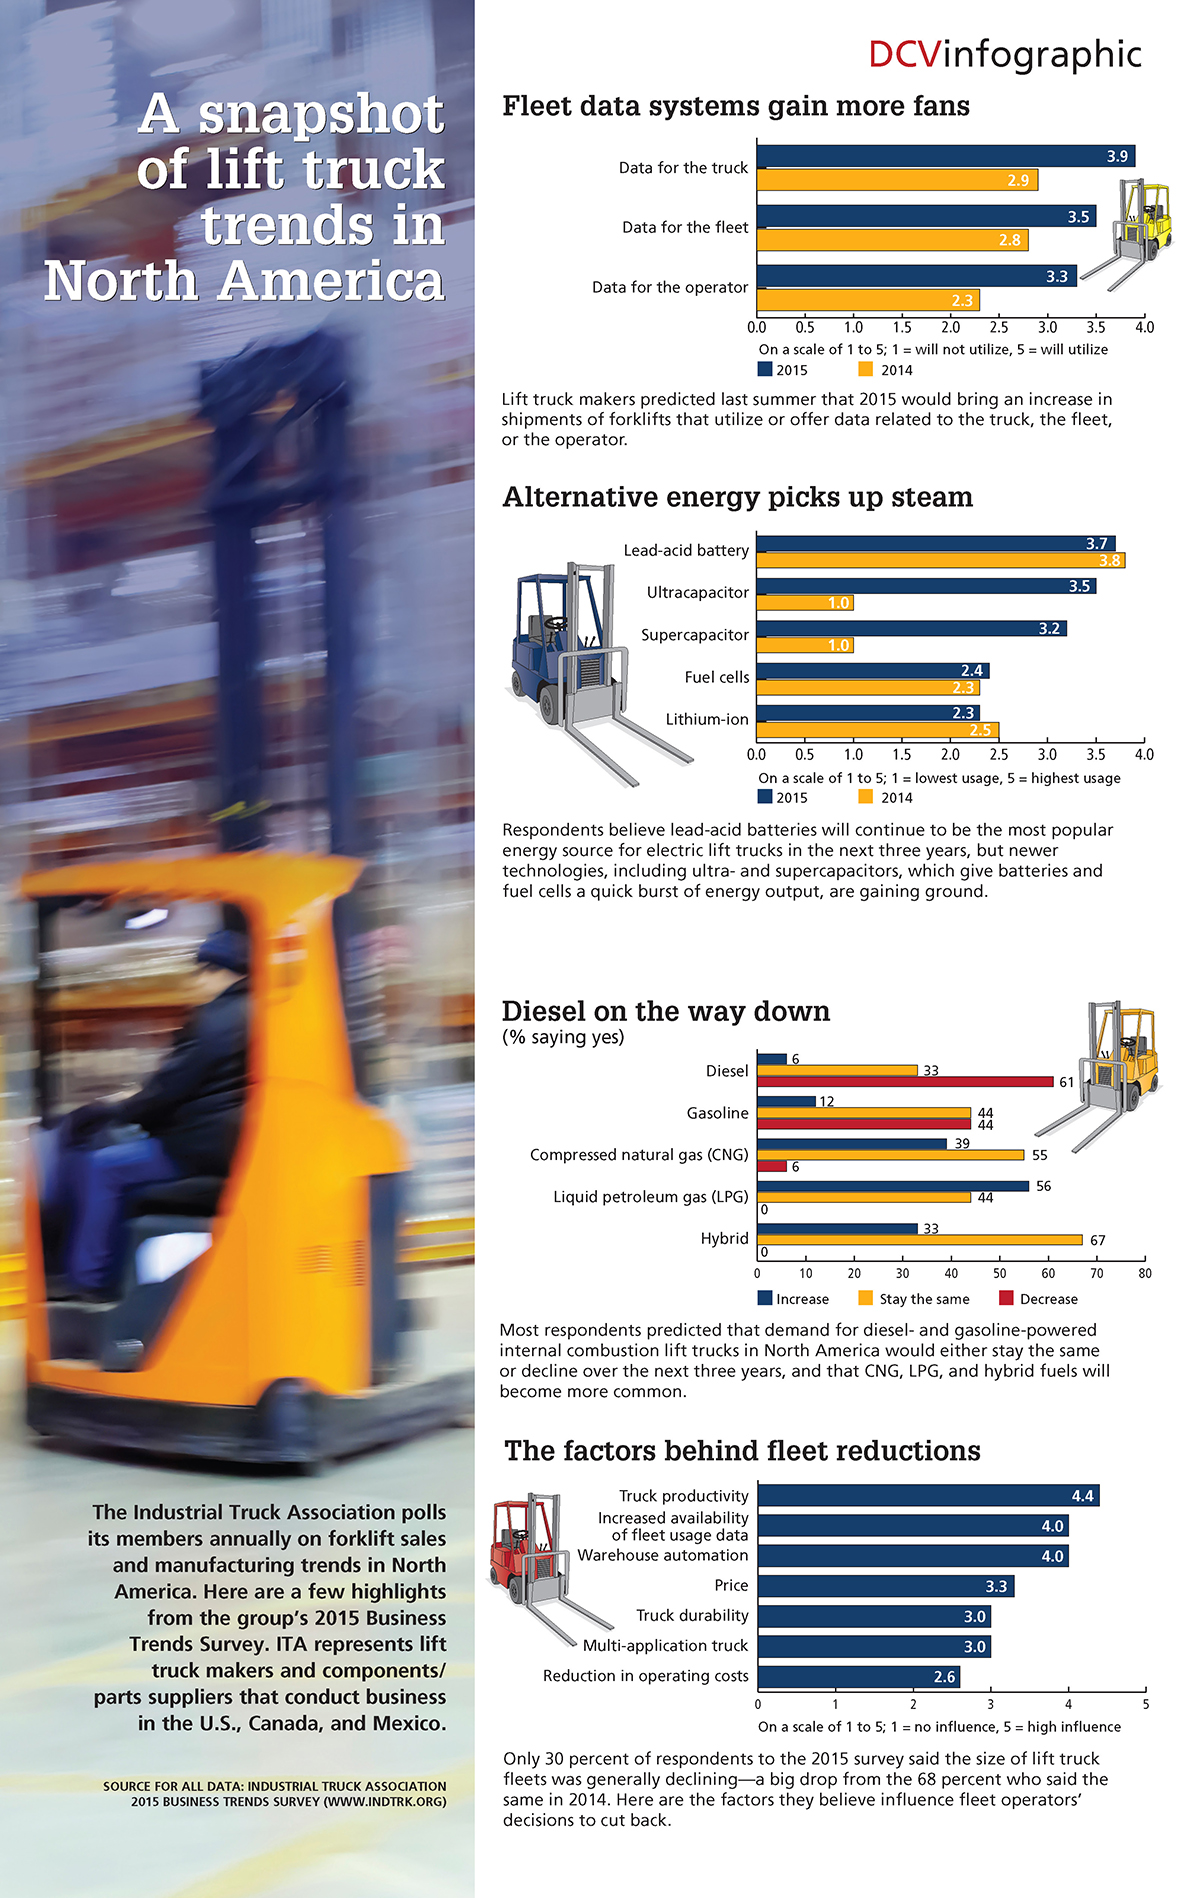 A snapshot of lift truck trends in North America: Here, some predictions about technology, energy sources, and fleet size for industrial trucks.